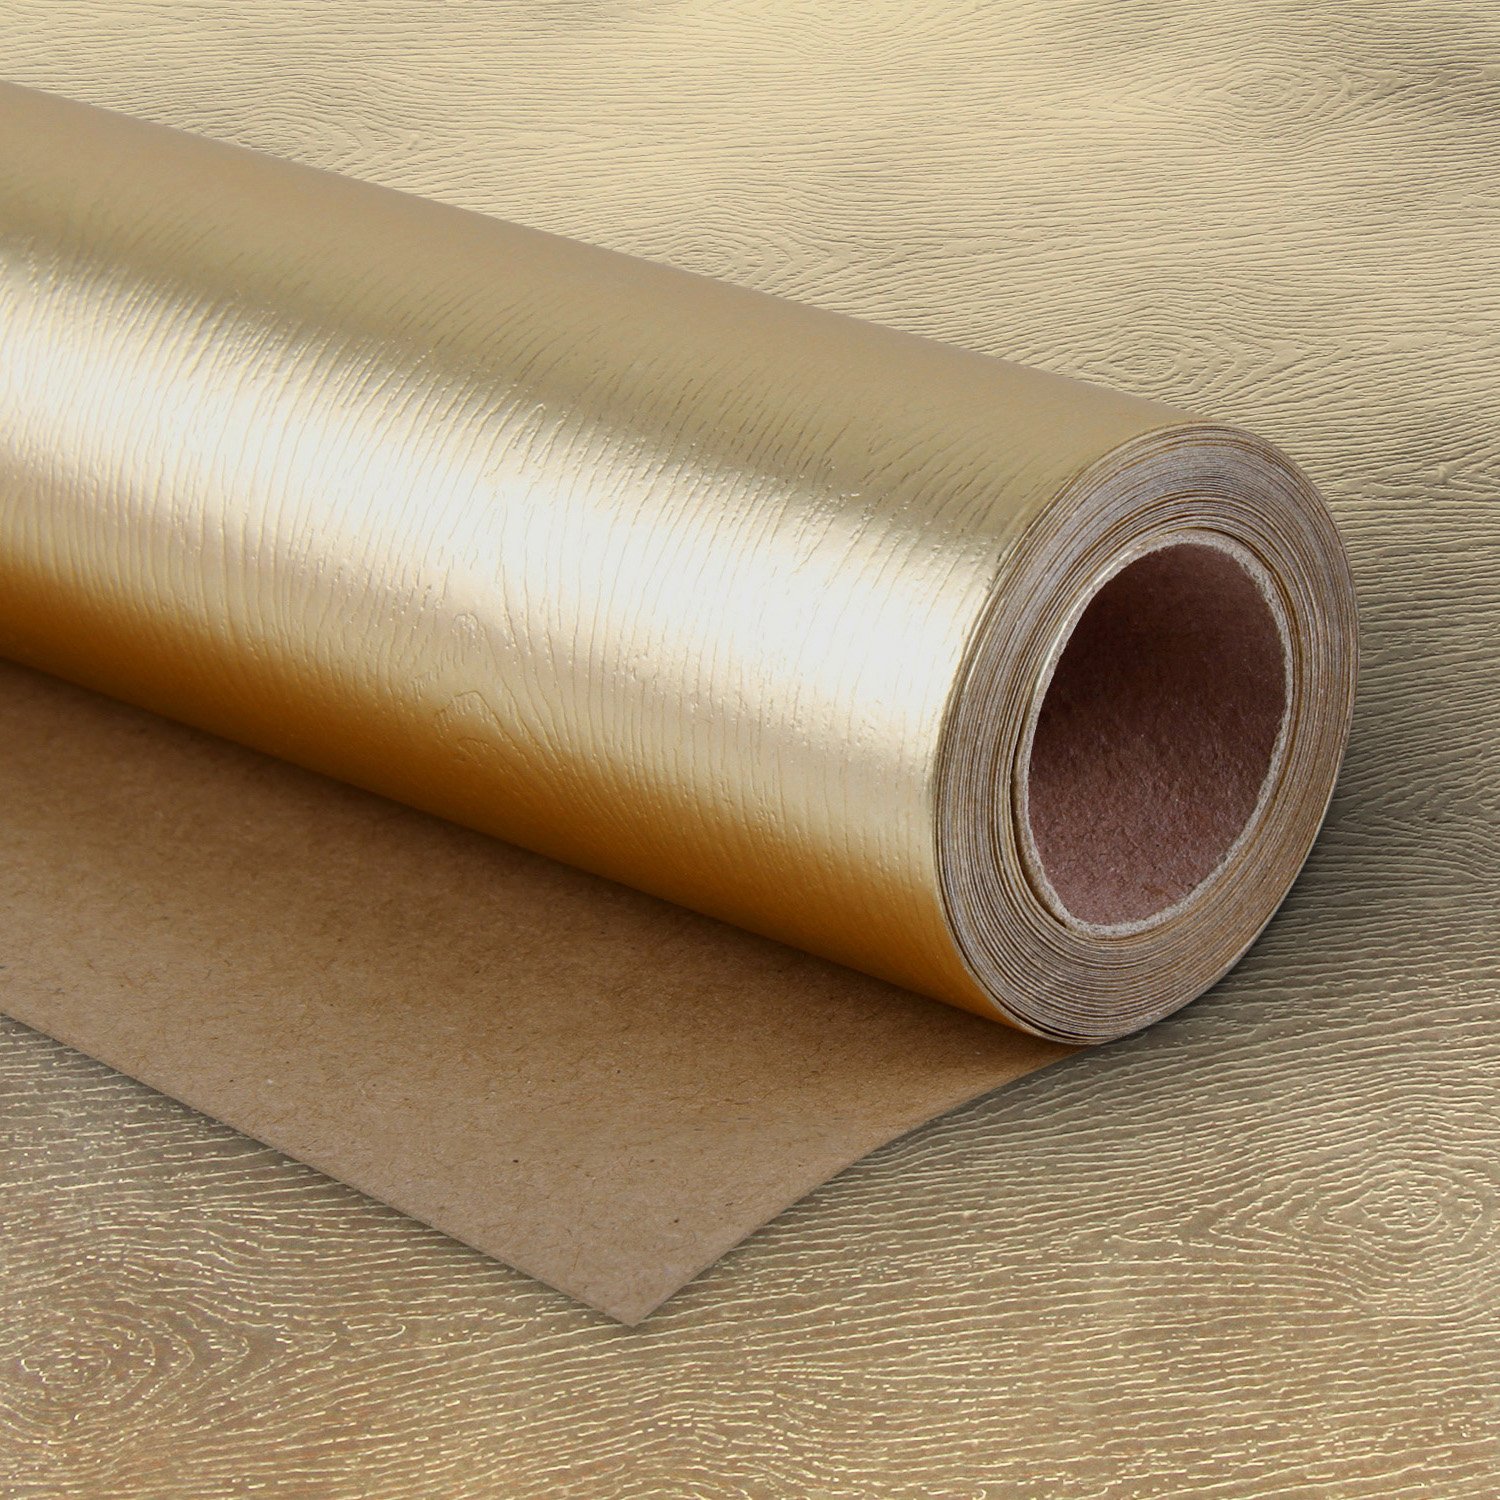 WRAPAHOLIC Wrapping Paper Roll - Basic Texture Matte Gold for Birthday, Holiday, Wedding, Baby Shower Wrap - 30 inch x 16.5 feet